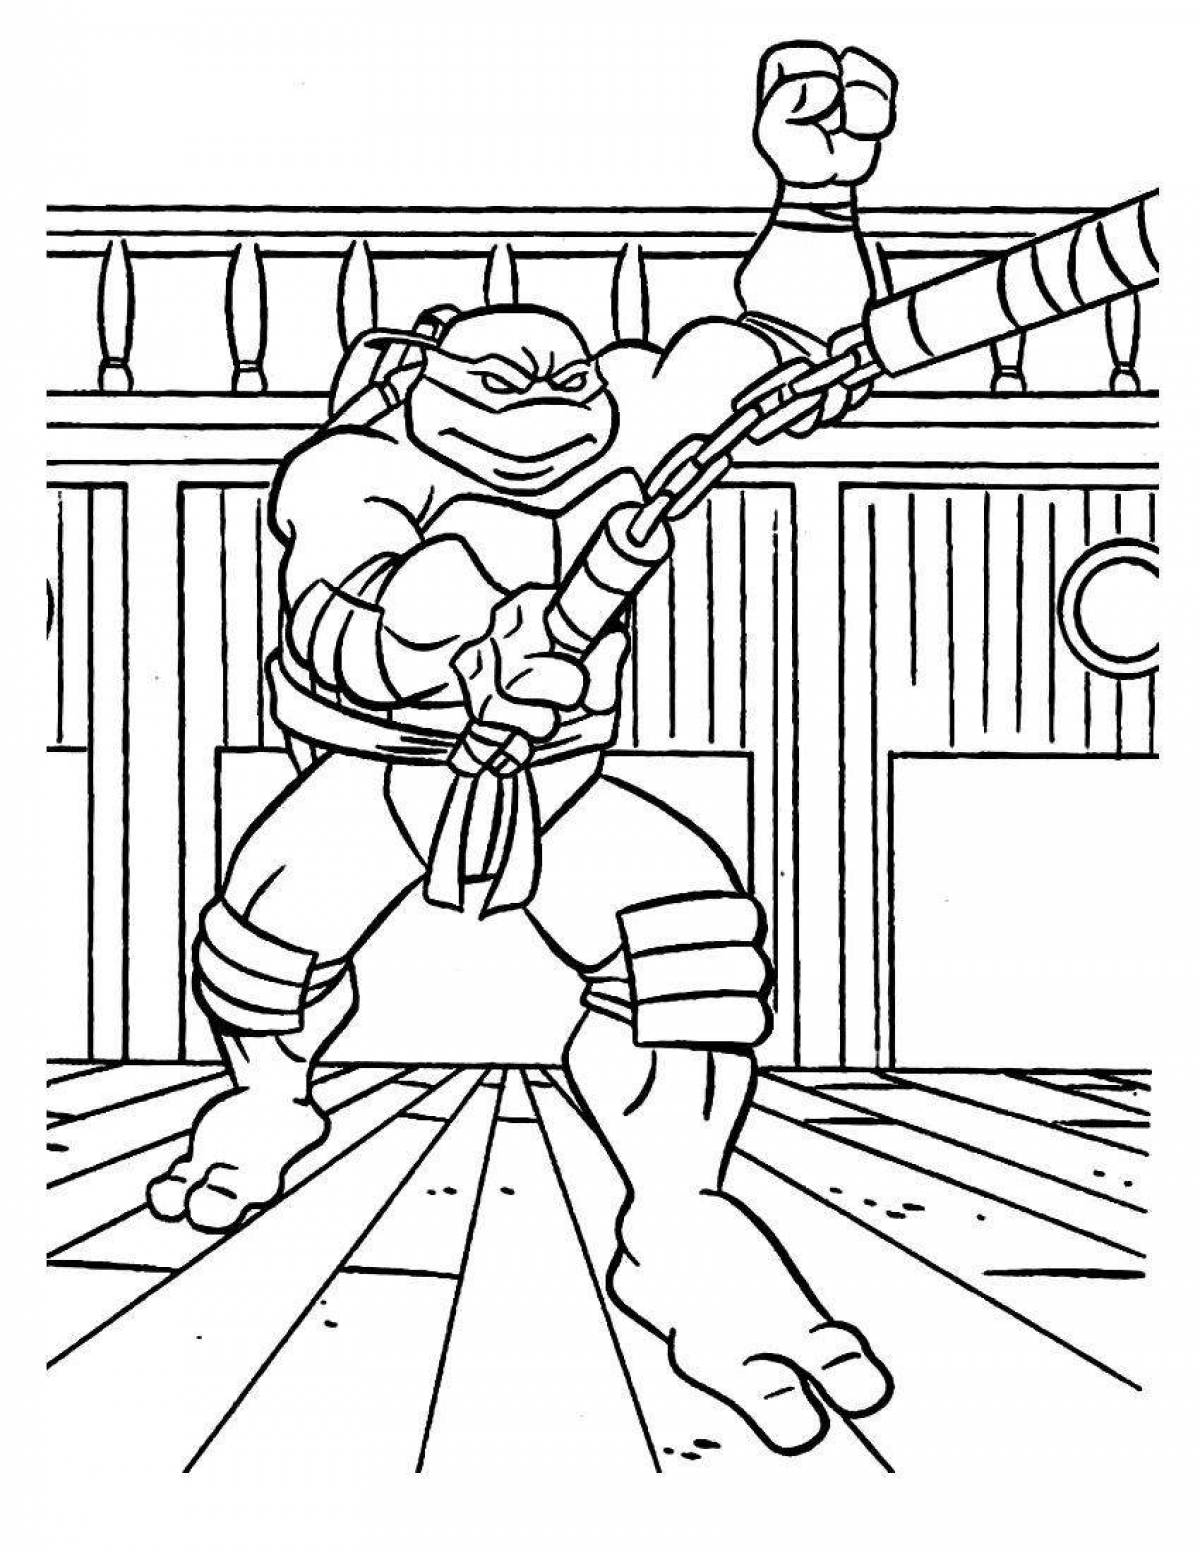 Gorgeous Teenage Mutant Ninja Turtles coloring pages for kids